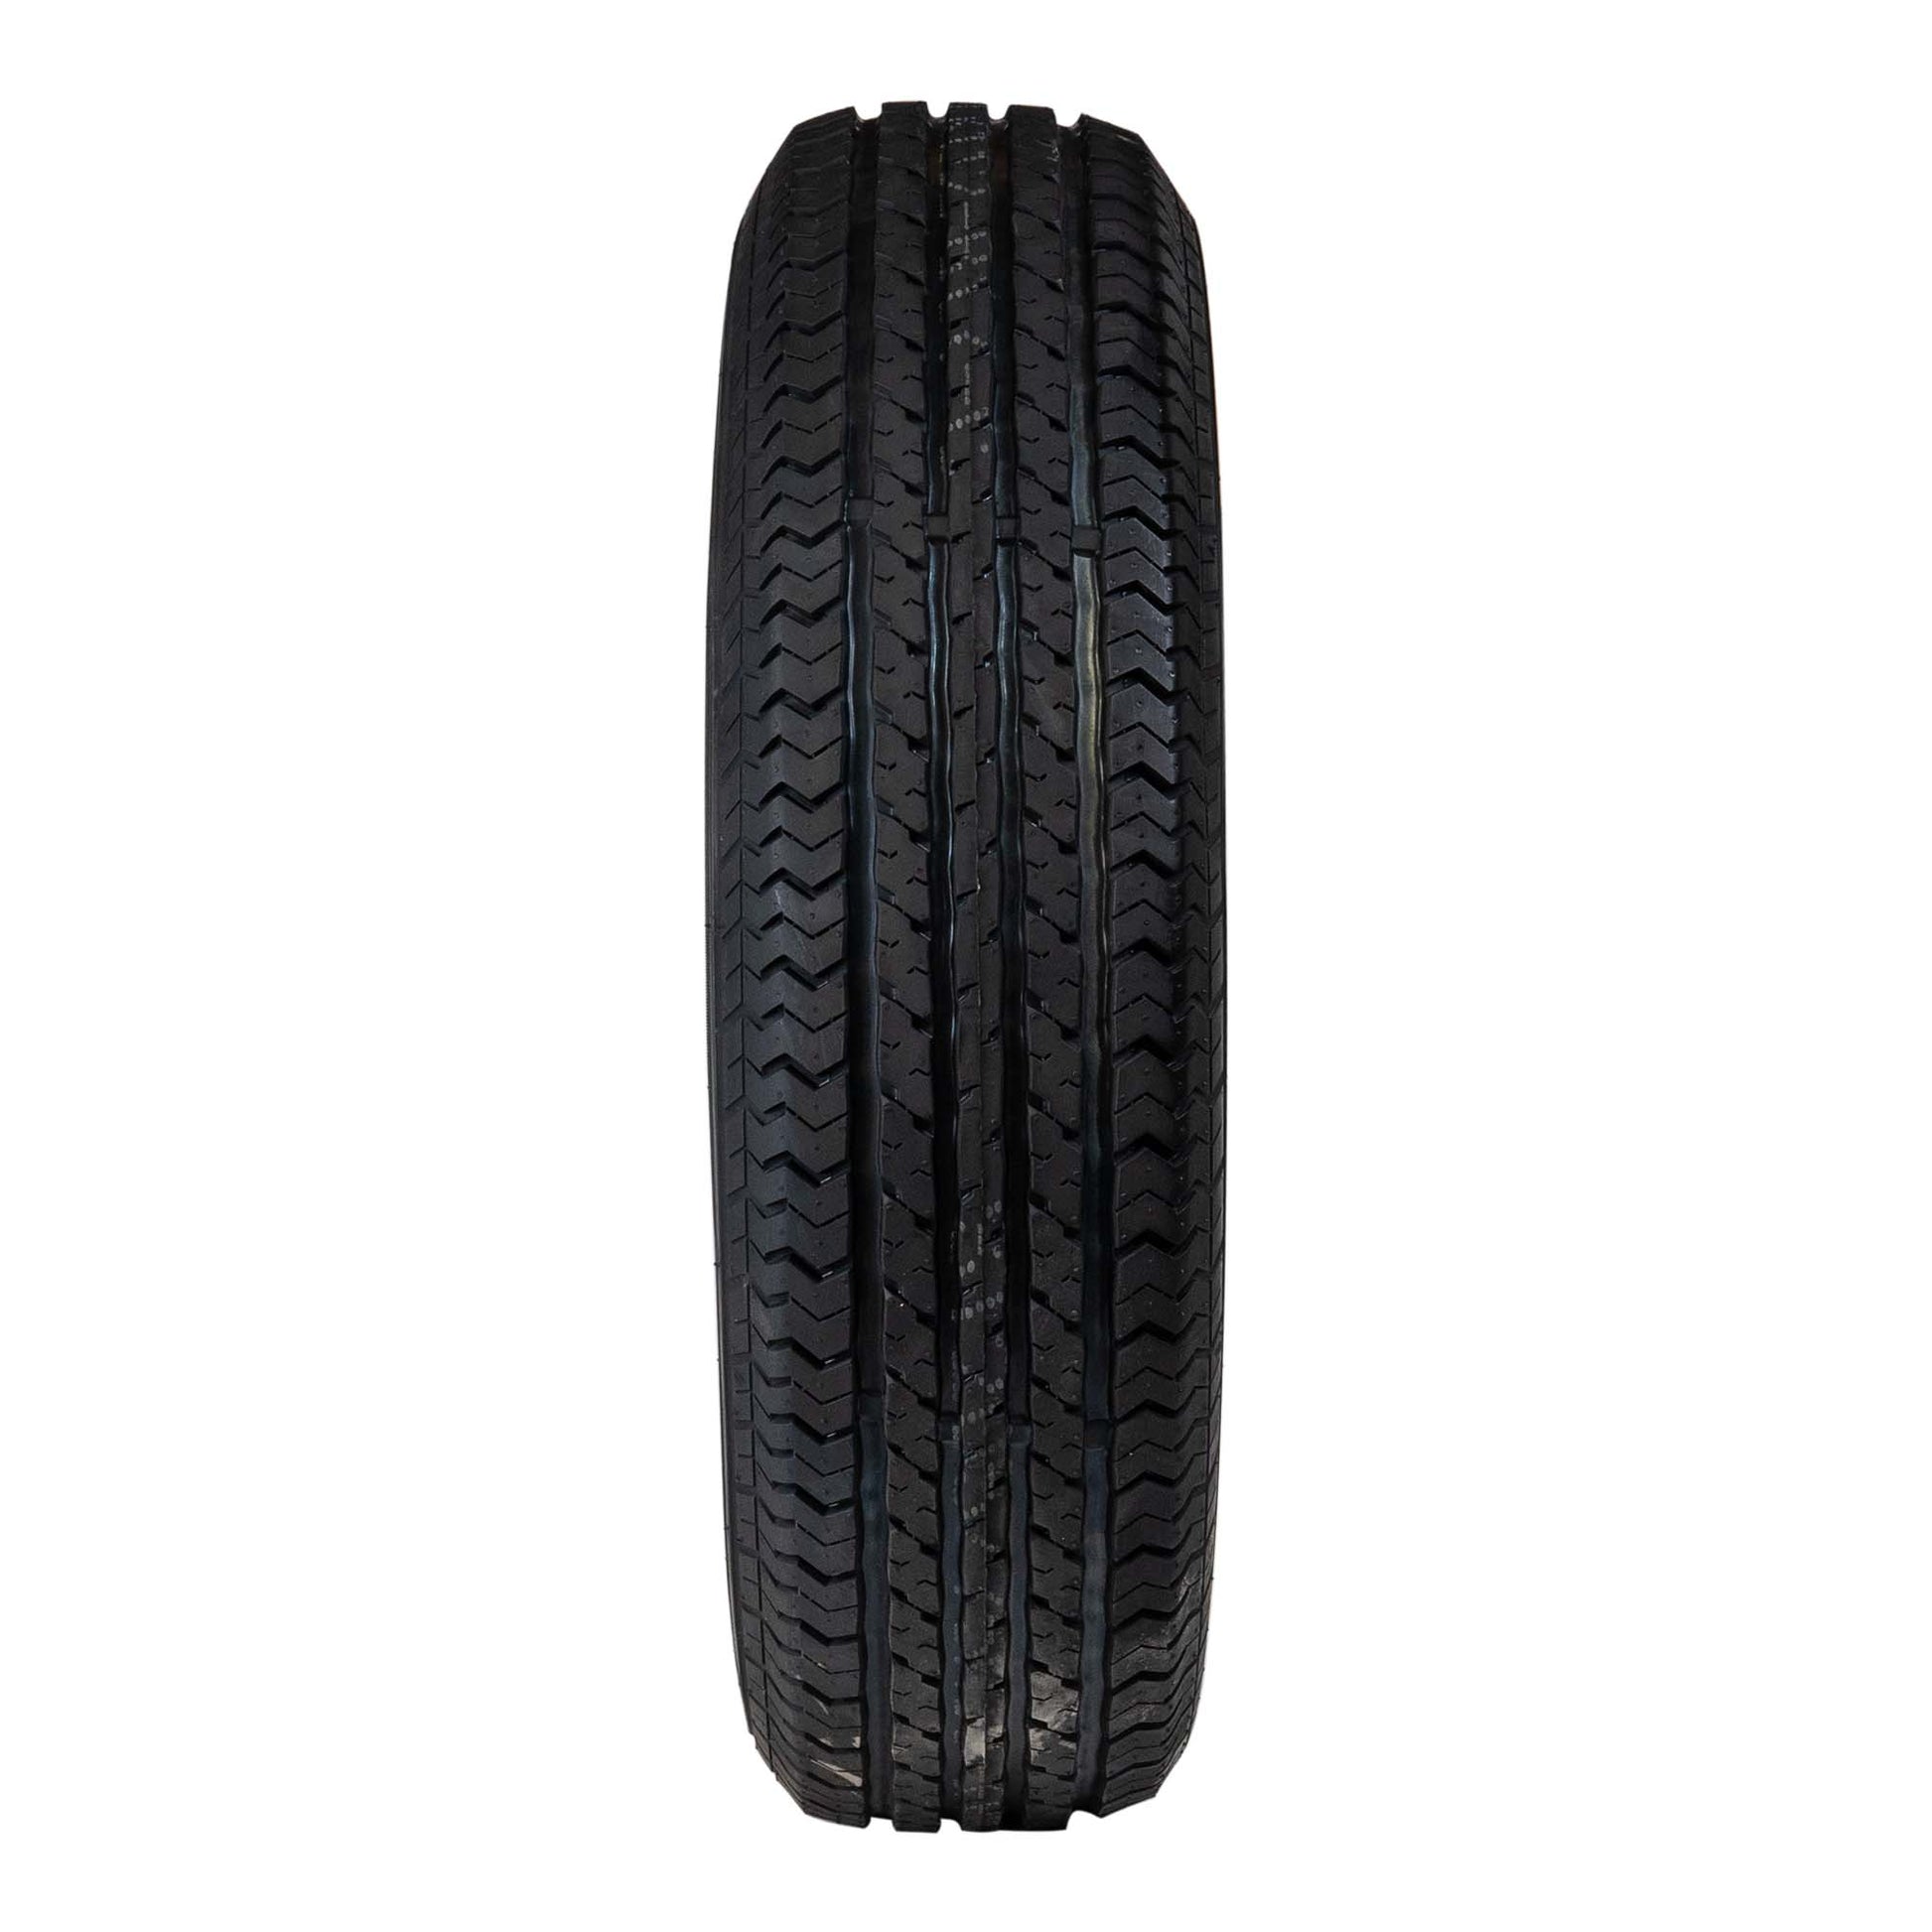 Goodride 205/75R15 6 Ply Trailer Tire - The Trailer Parts Outlet